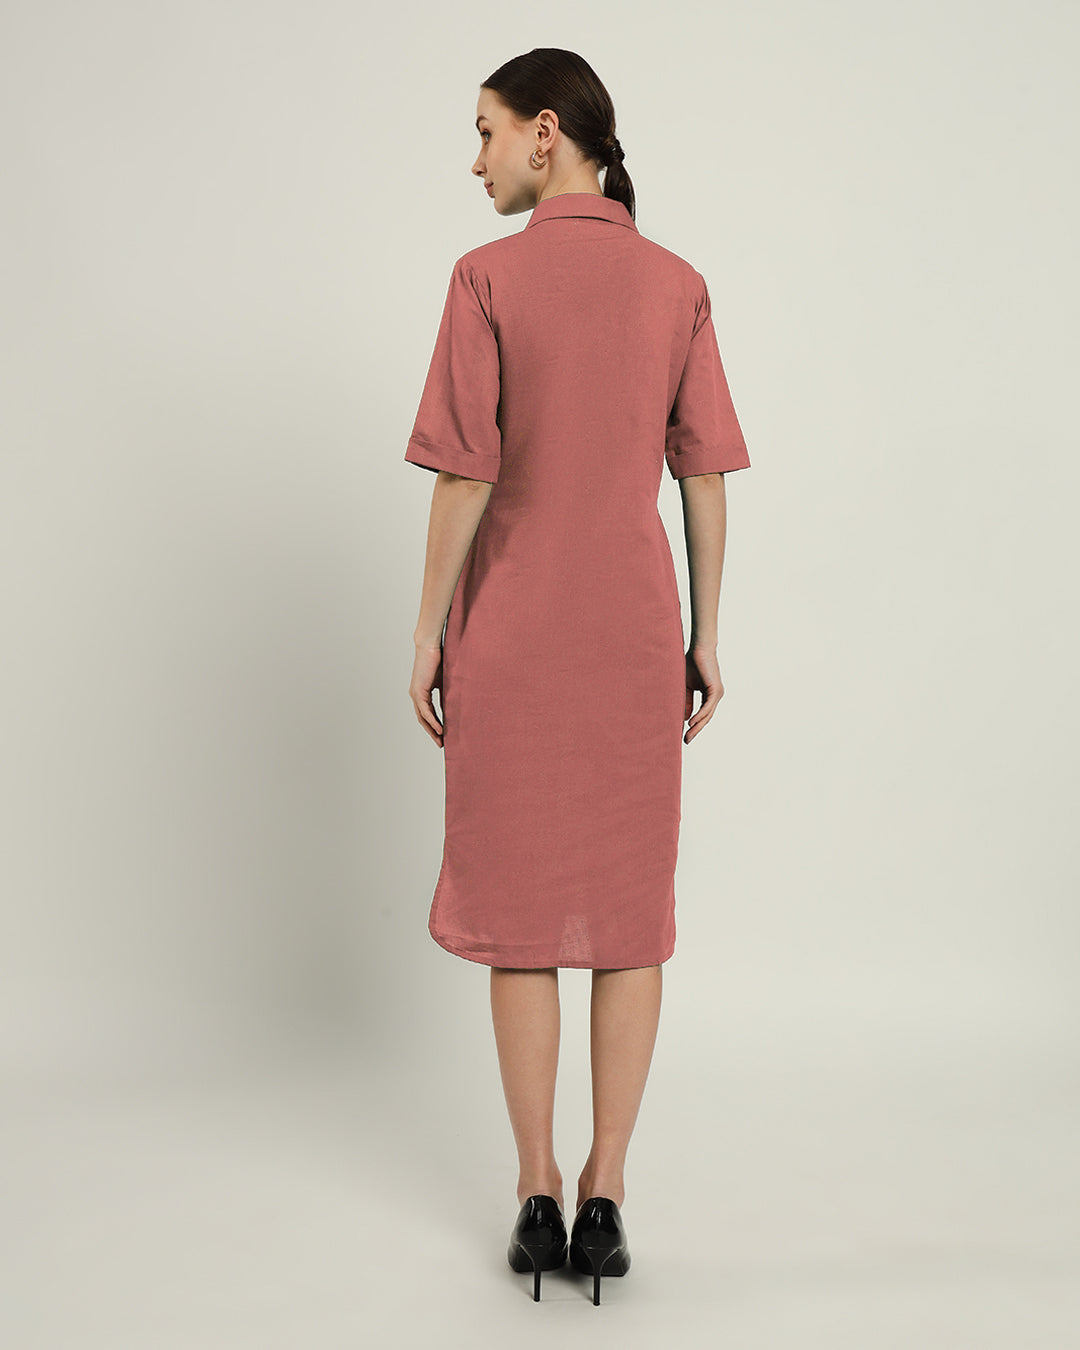 The Tampa Ivory Pink Cotton Dress